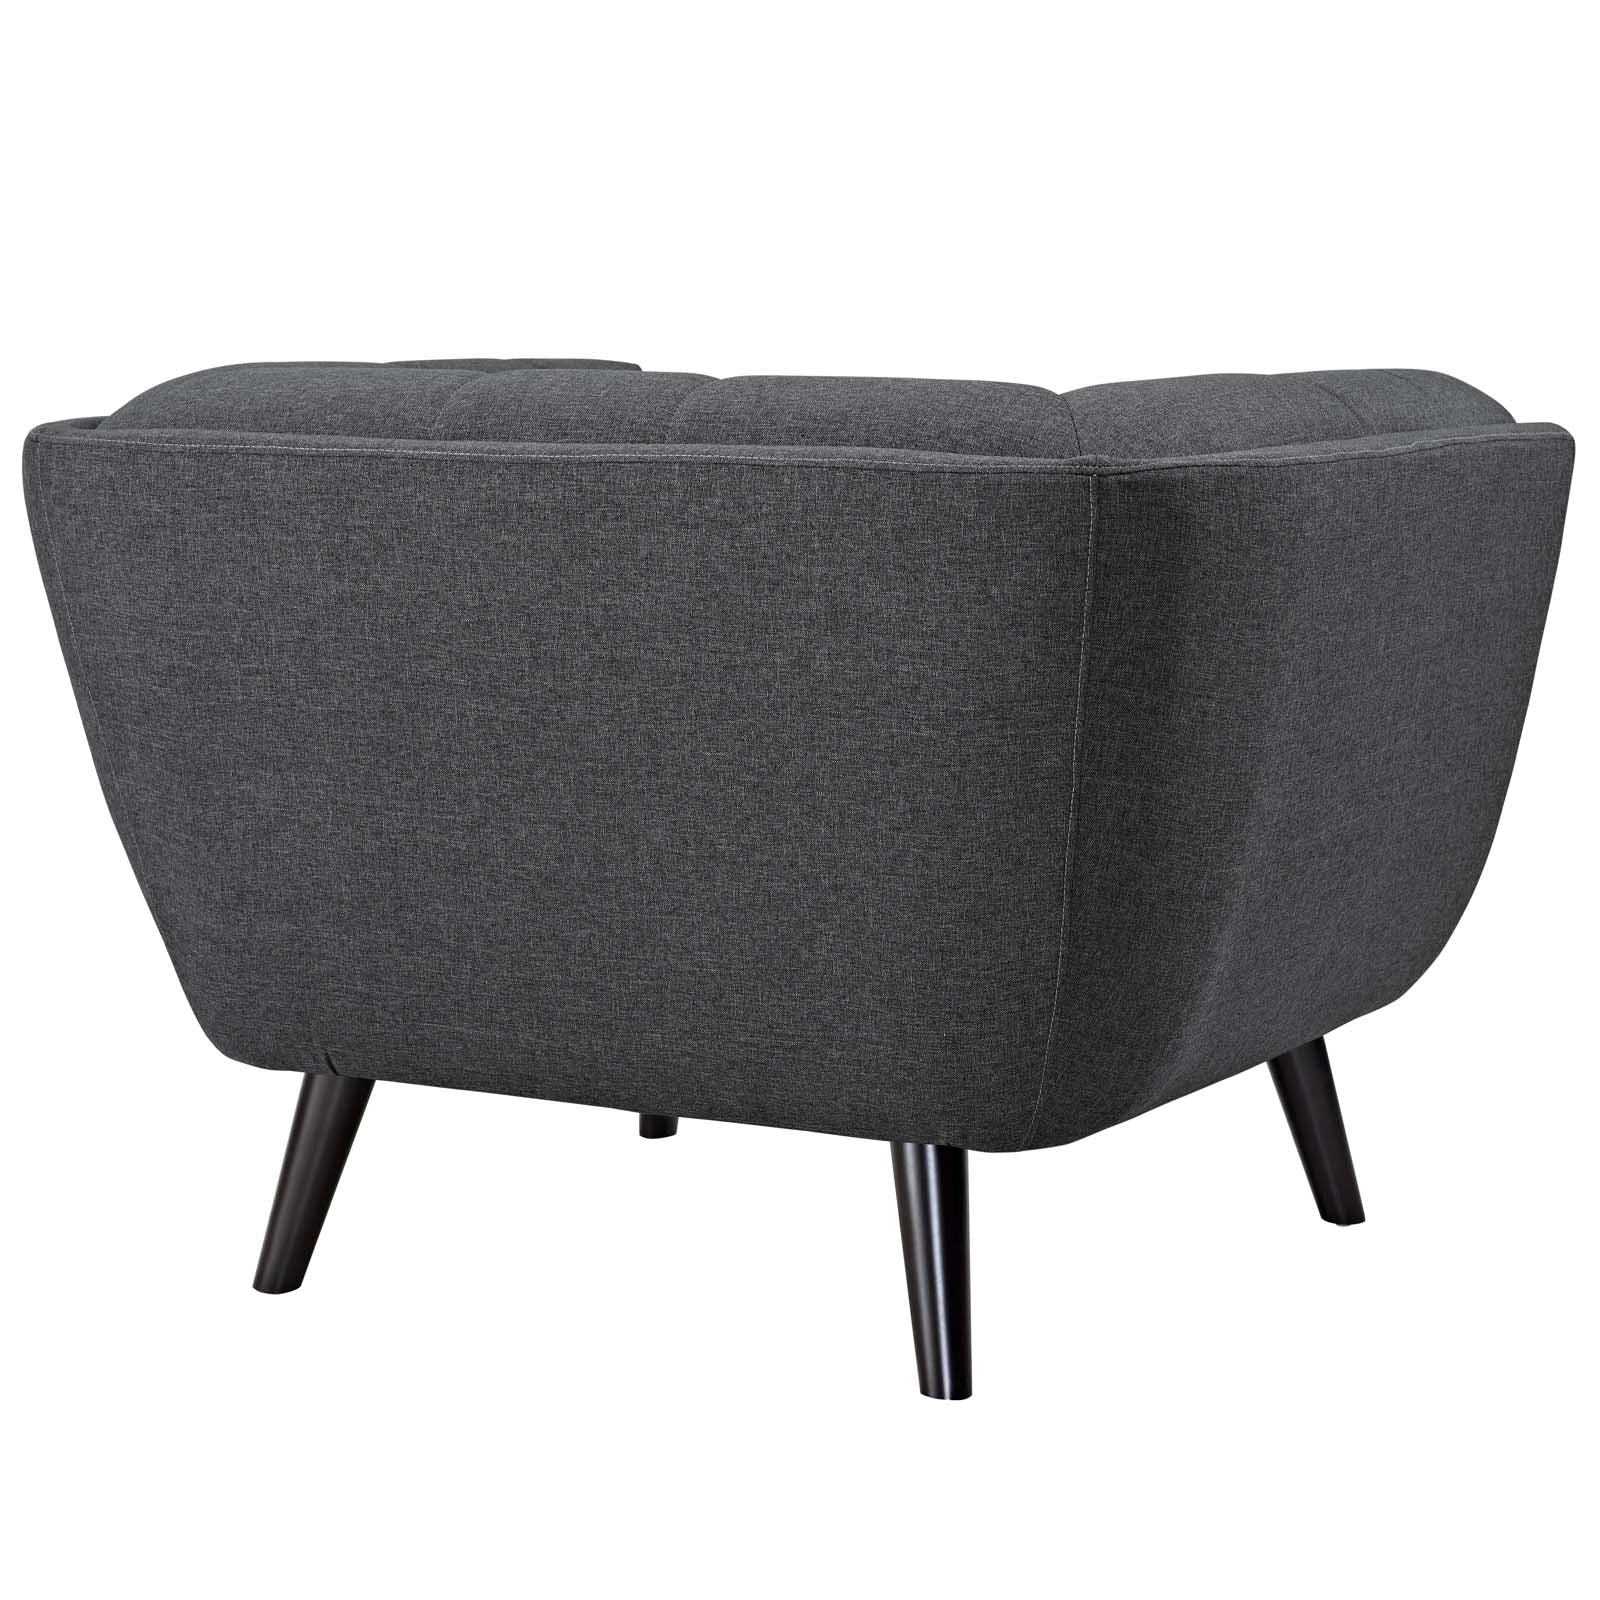 Modway Living Room Sets - Bestow 2 Piece Upholstered Fabric Armchair Set Gray